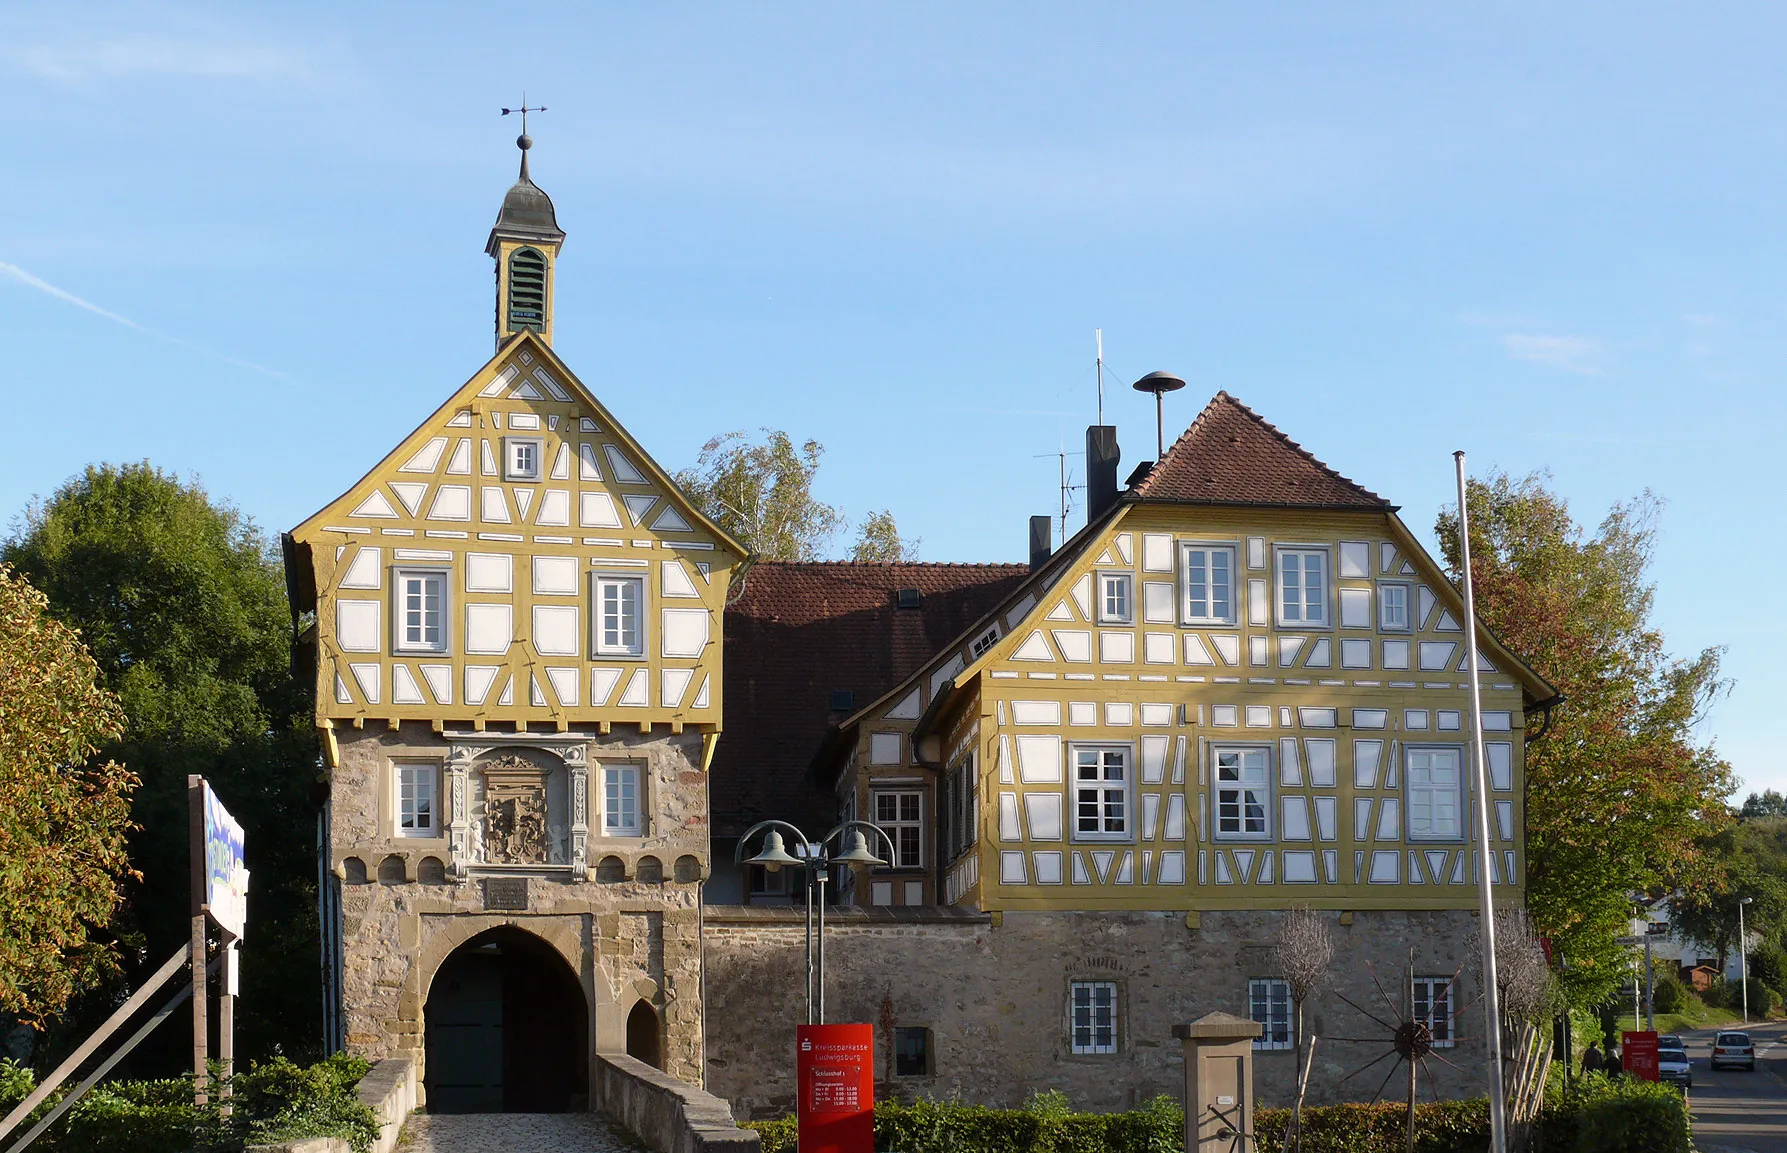 Photo showing: The main façade of the little castle in Höpfigheim, a district of Steinheim an der Murr, Germany, seen from the Schlossplatz at the north side of the castle.